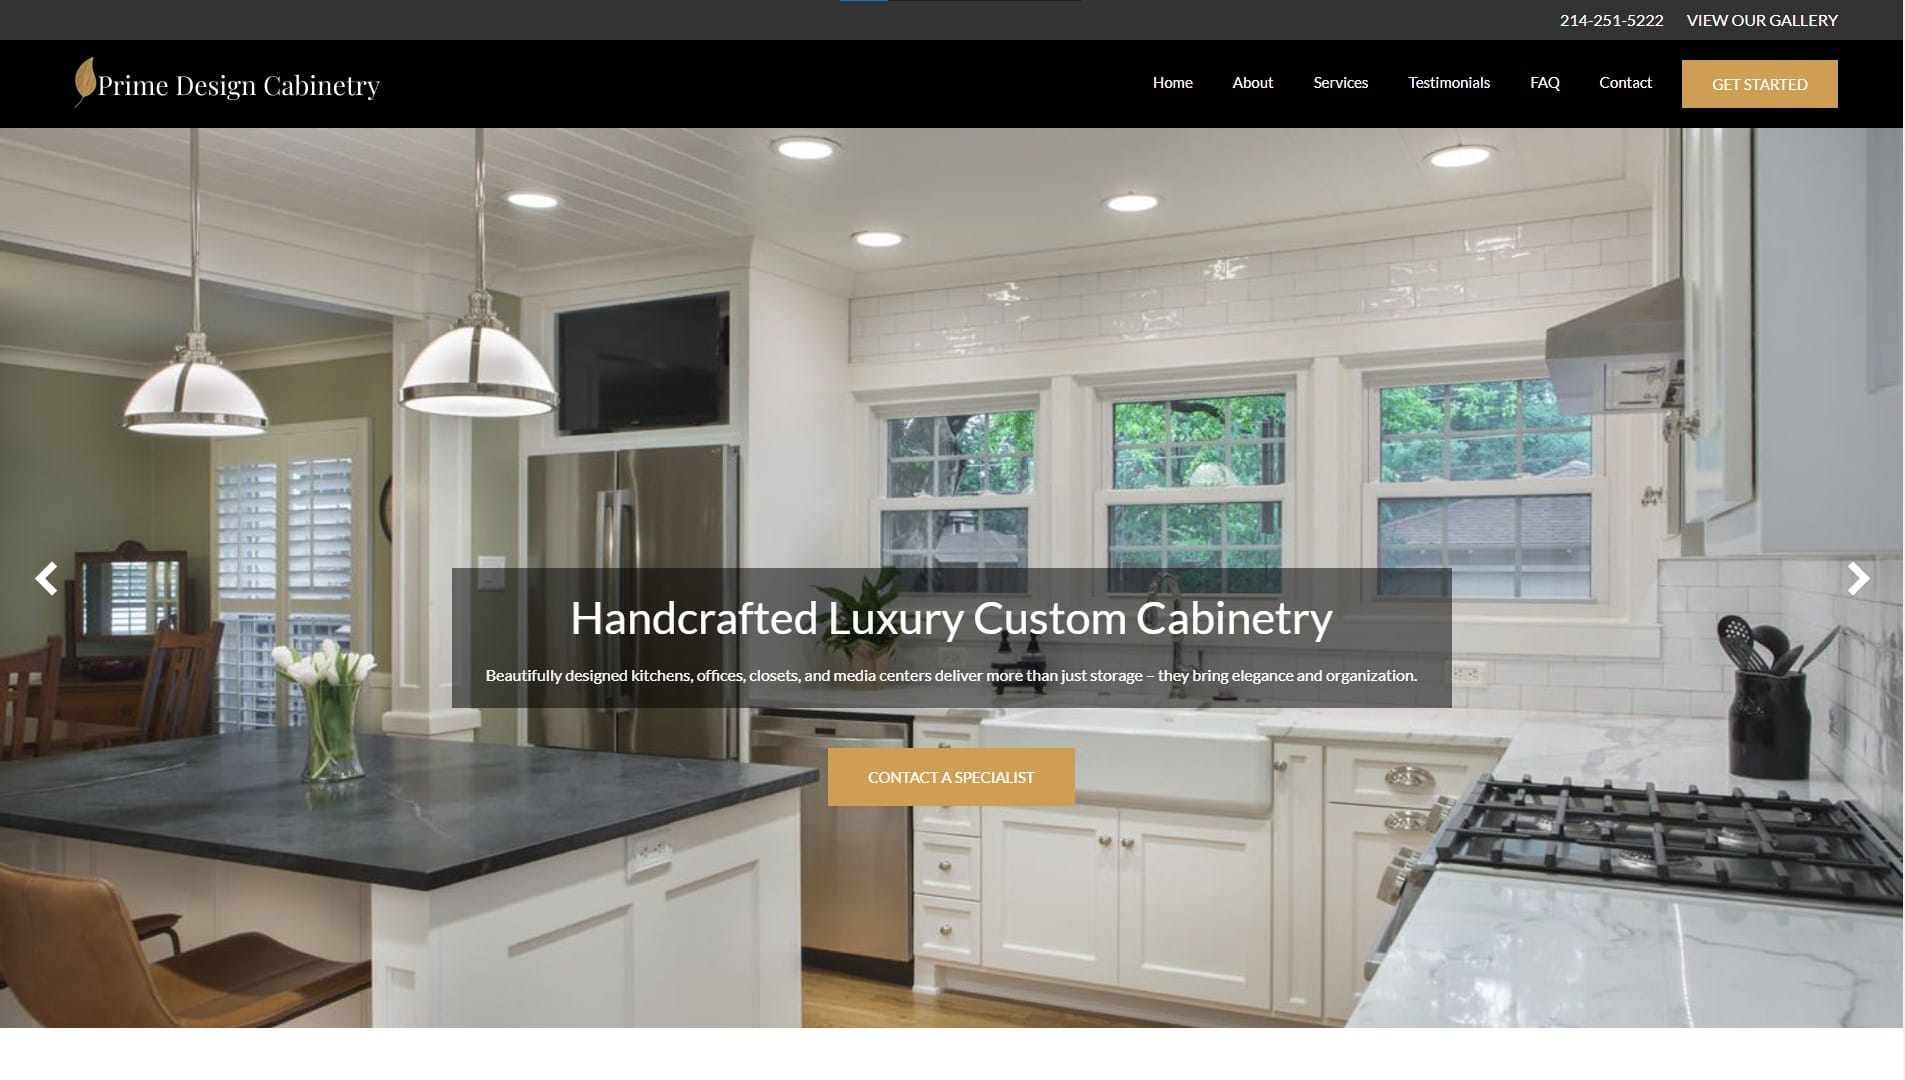 How Prime Design Cabinetry is able to Attract New & More Qualified Customers.